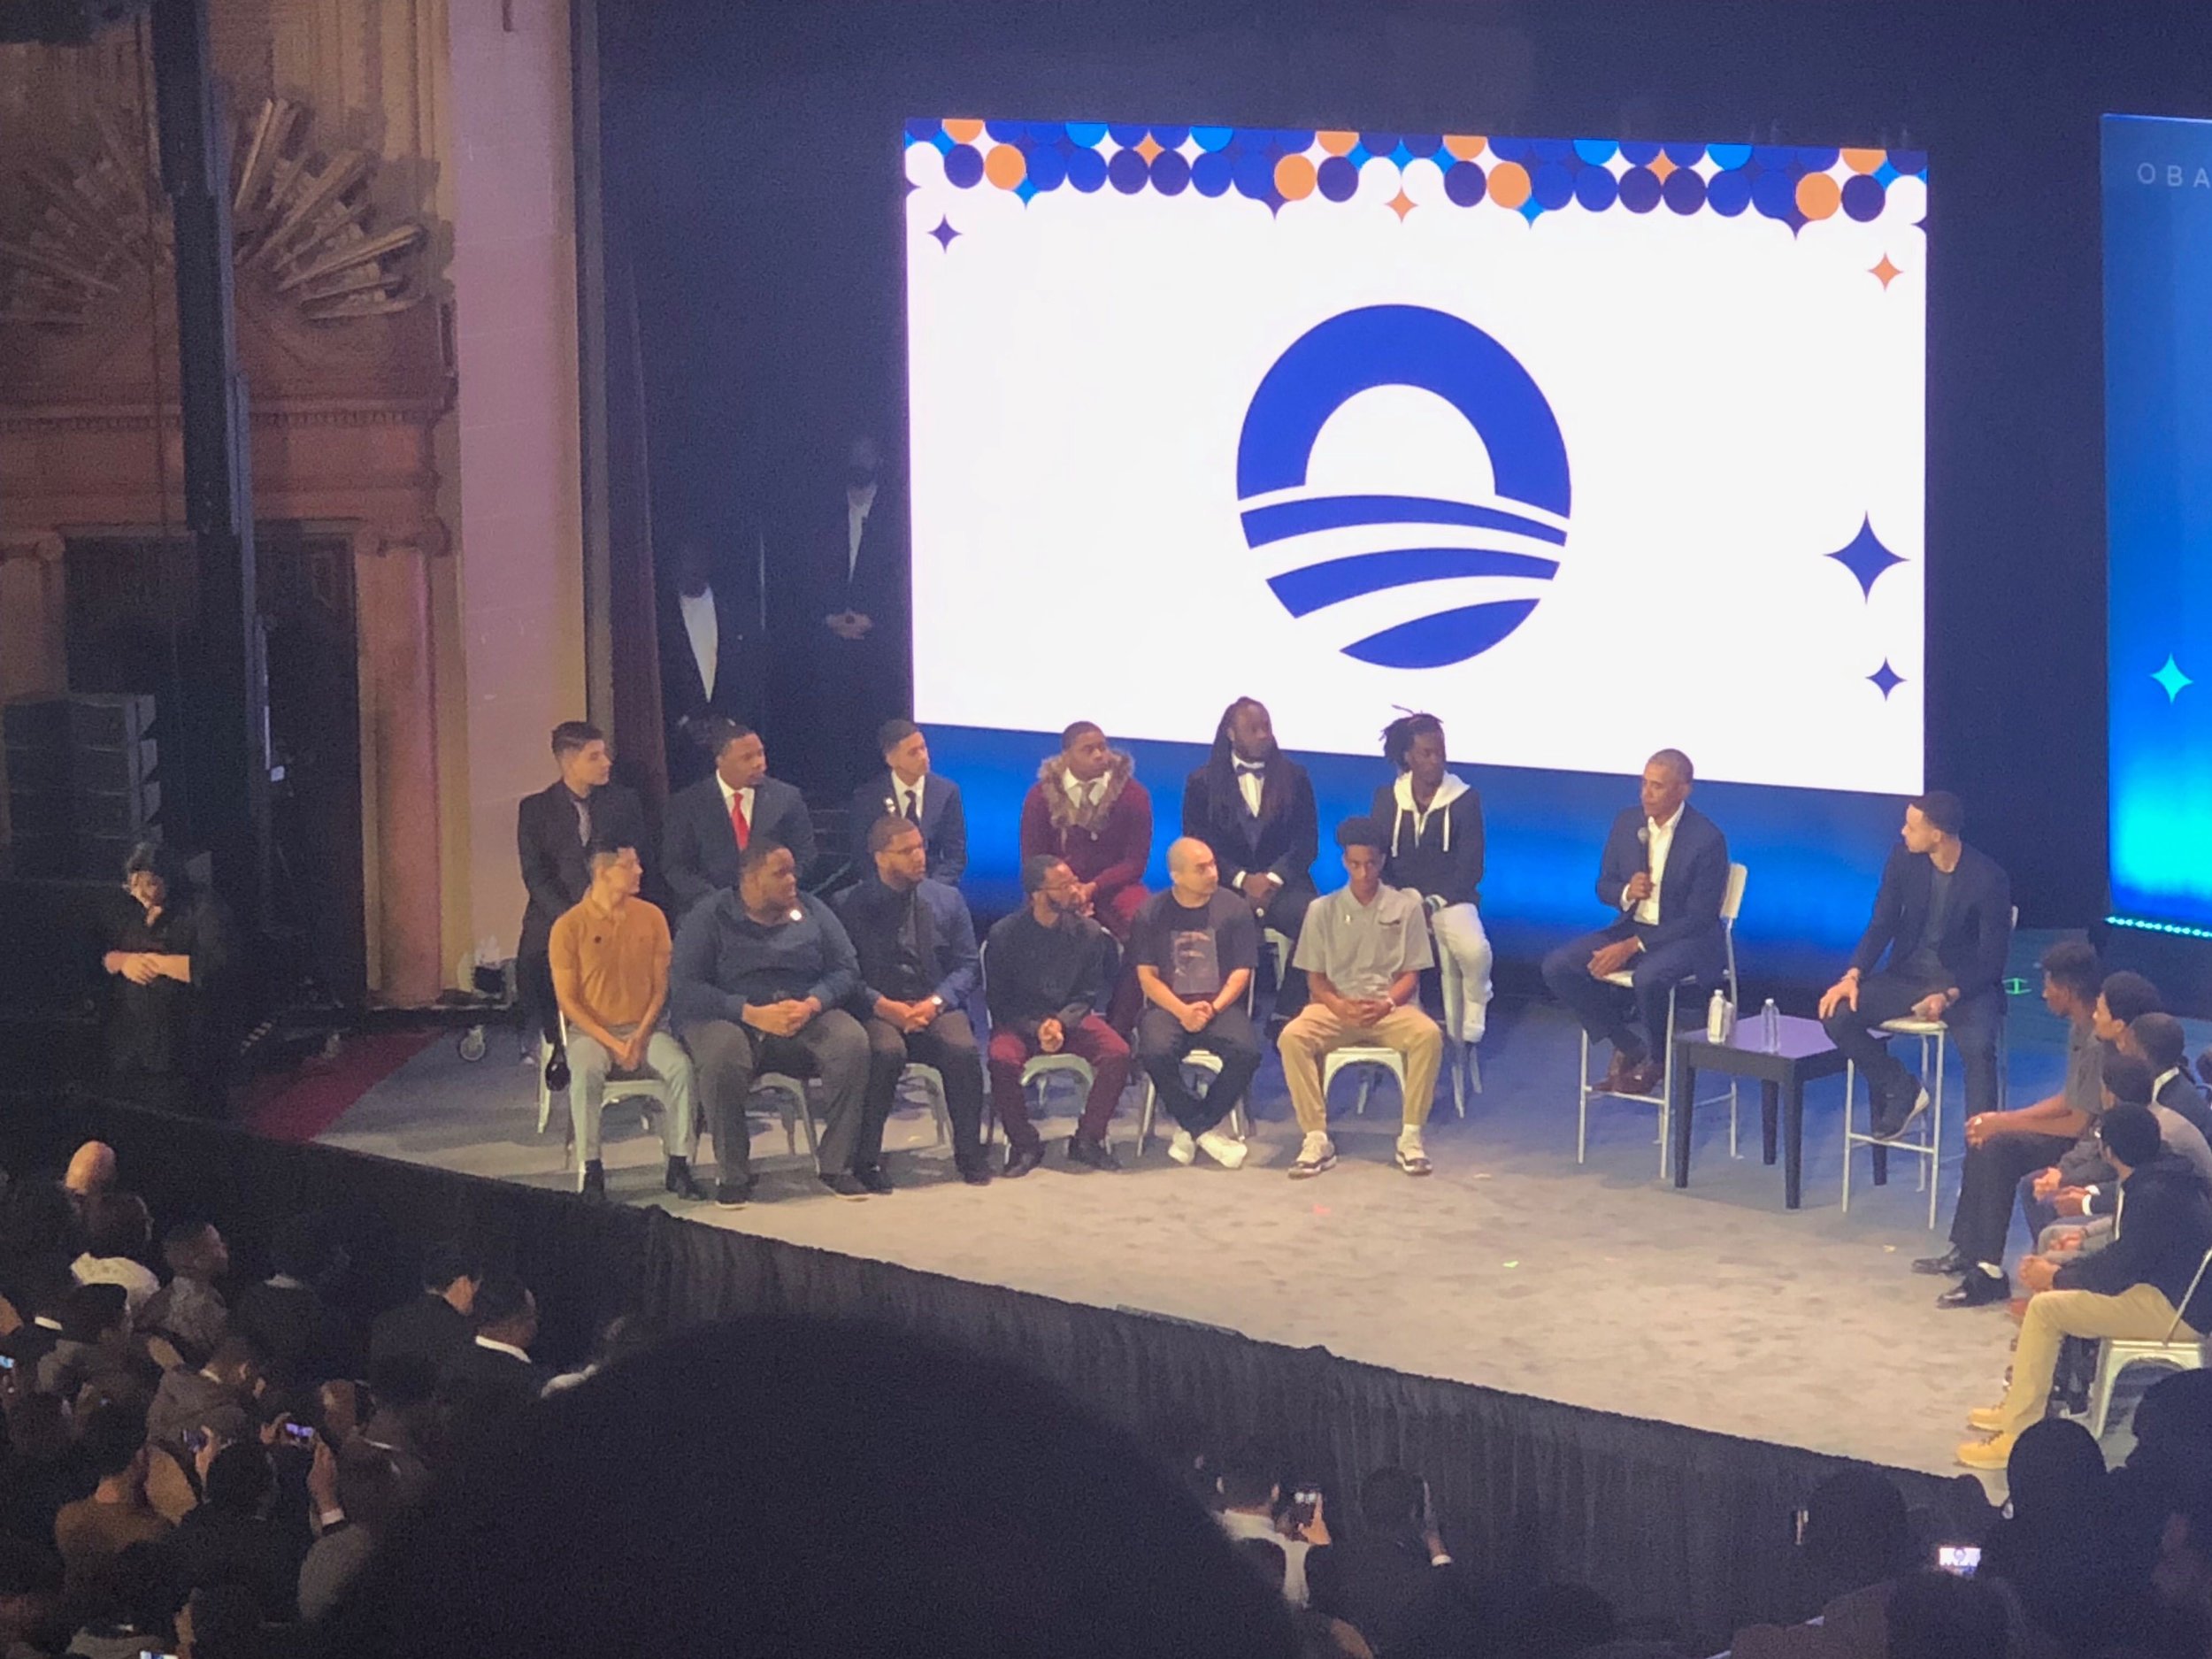 Youth Justice Assistant Tj Sykes at Obama Foundation's MBK Rising!